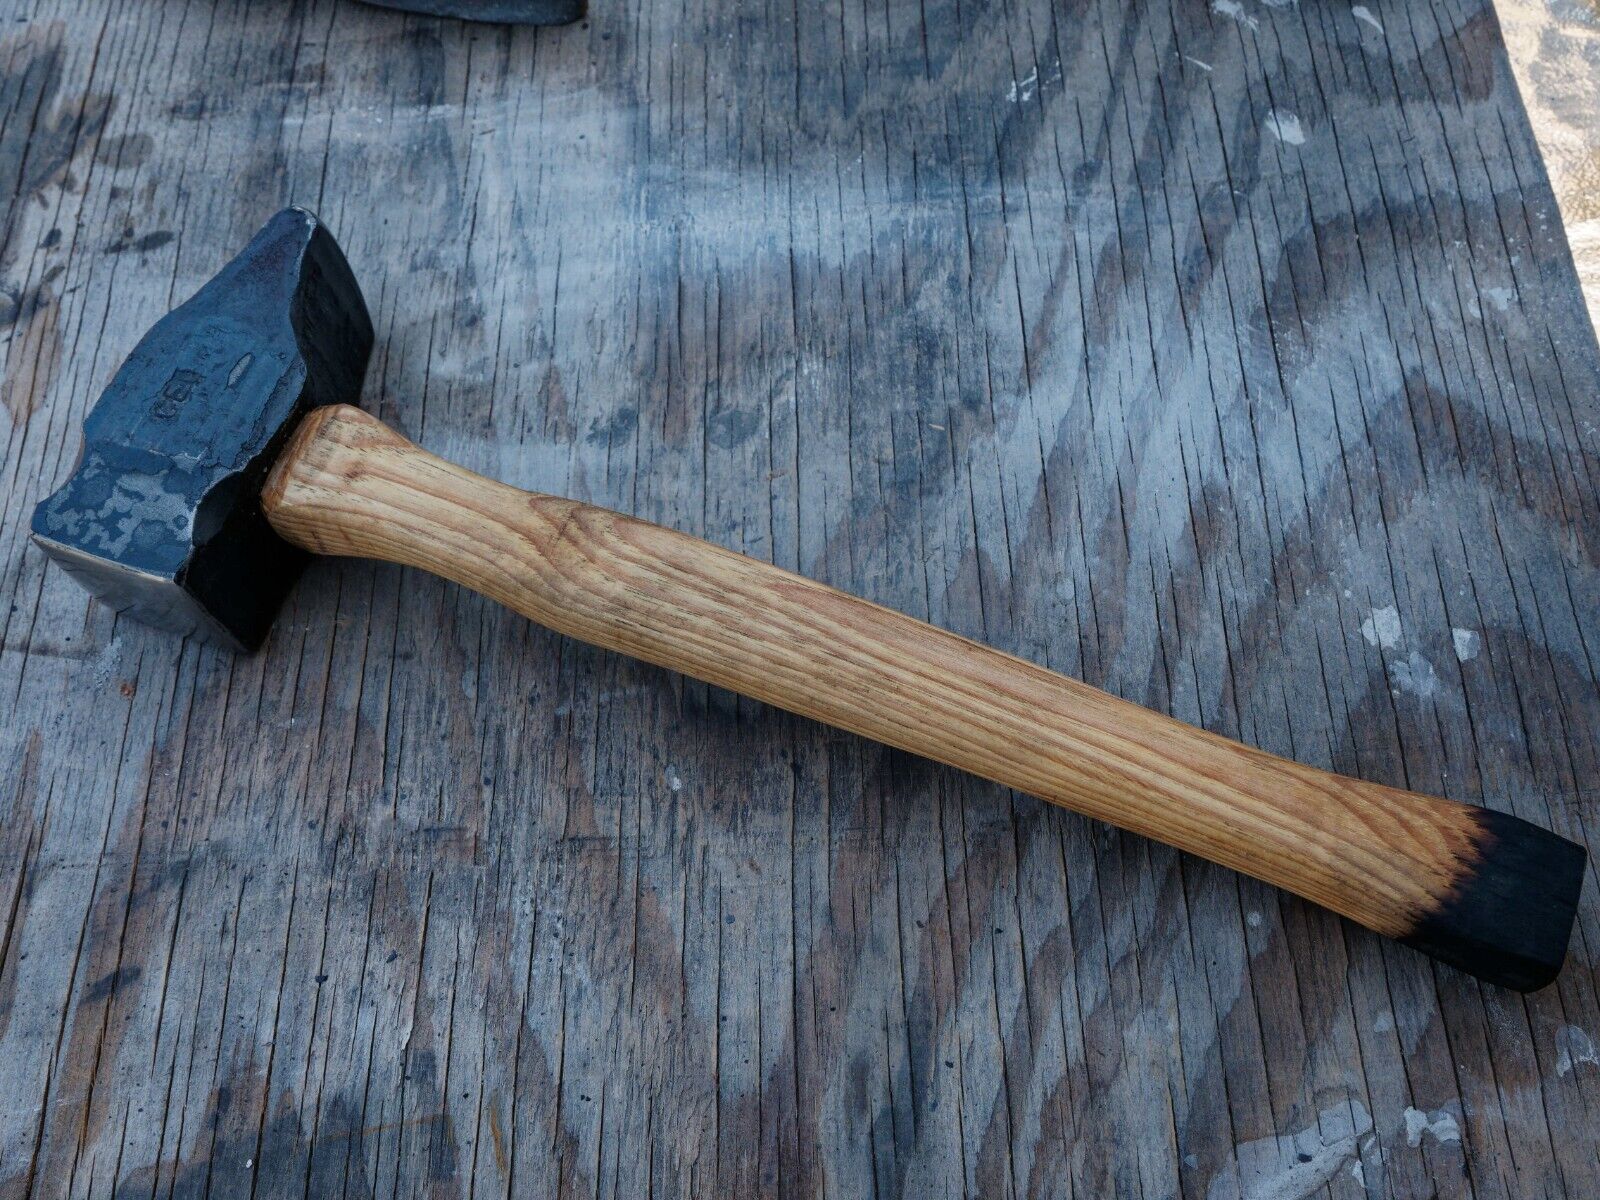 Blacksmith's Cross Peen Hammer with American Hickory handle by Red Tail Forge